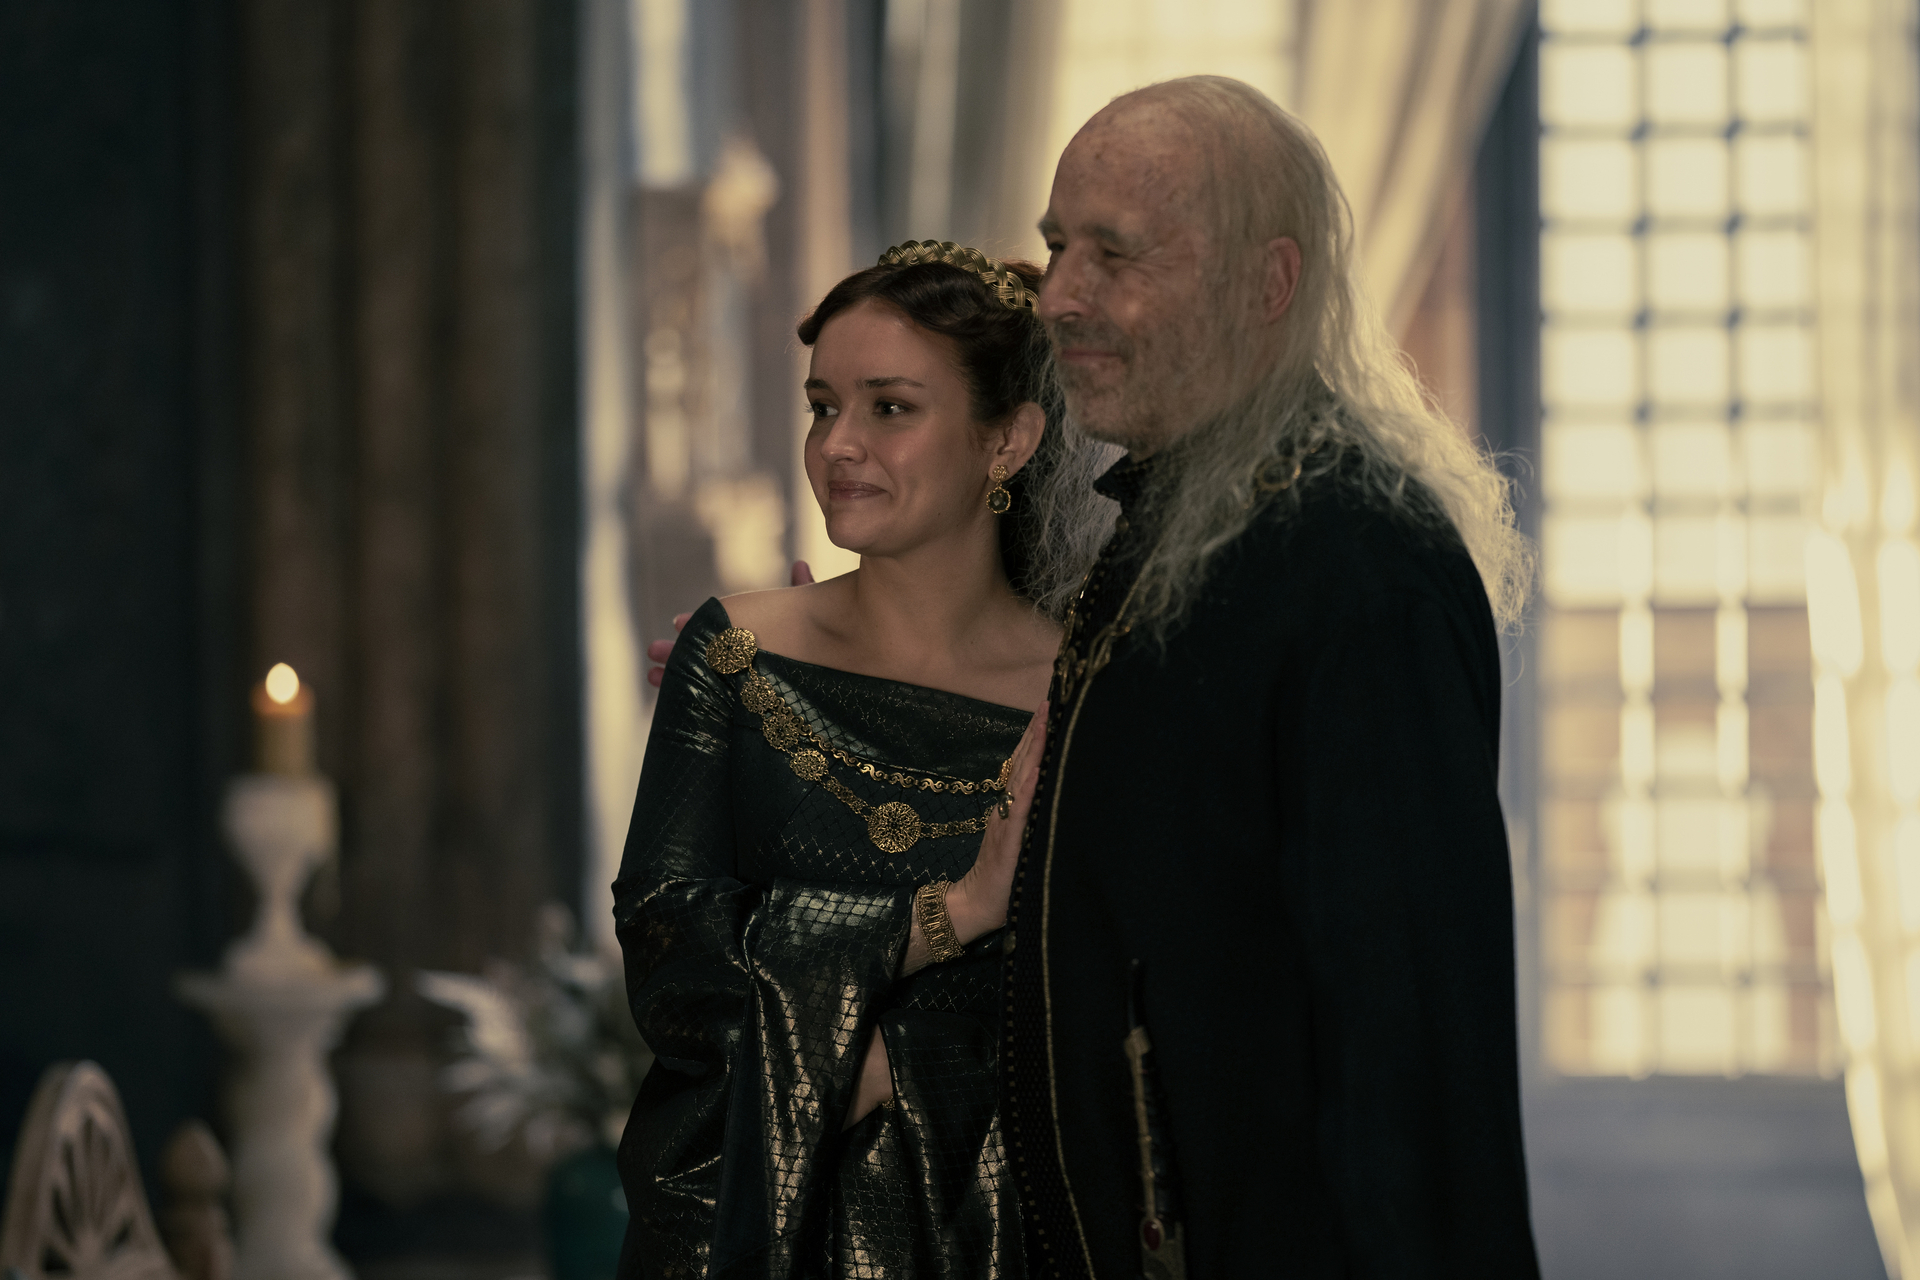 Alicent (Olivia Cooke) and Viserys (Paddy Considine) in 'House of the Dragon' Episode 6